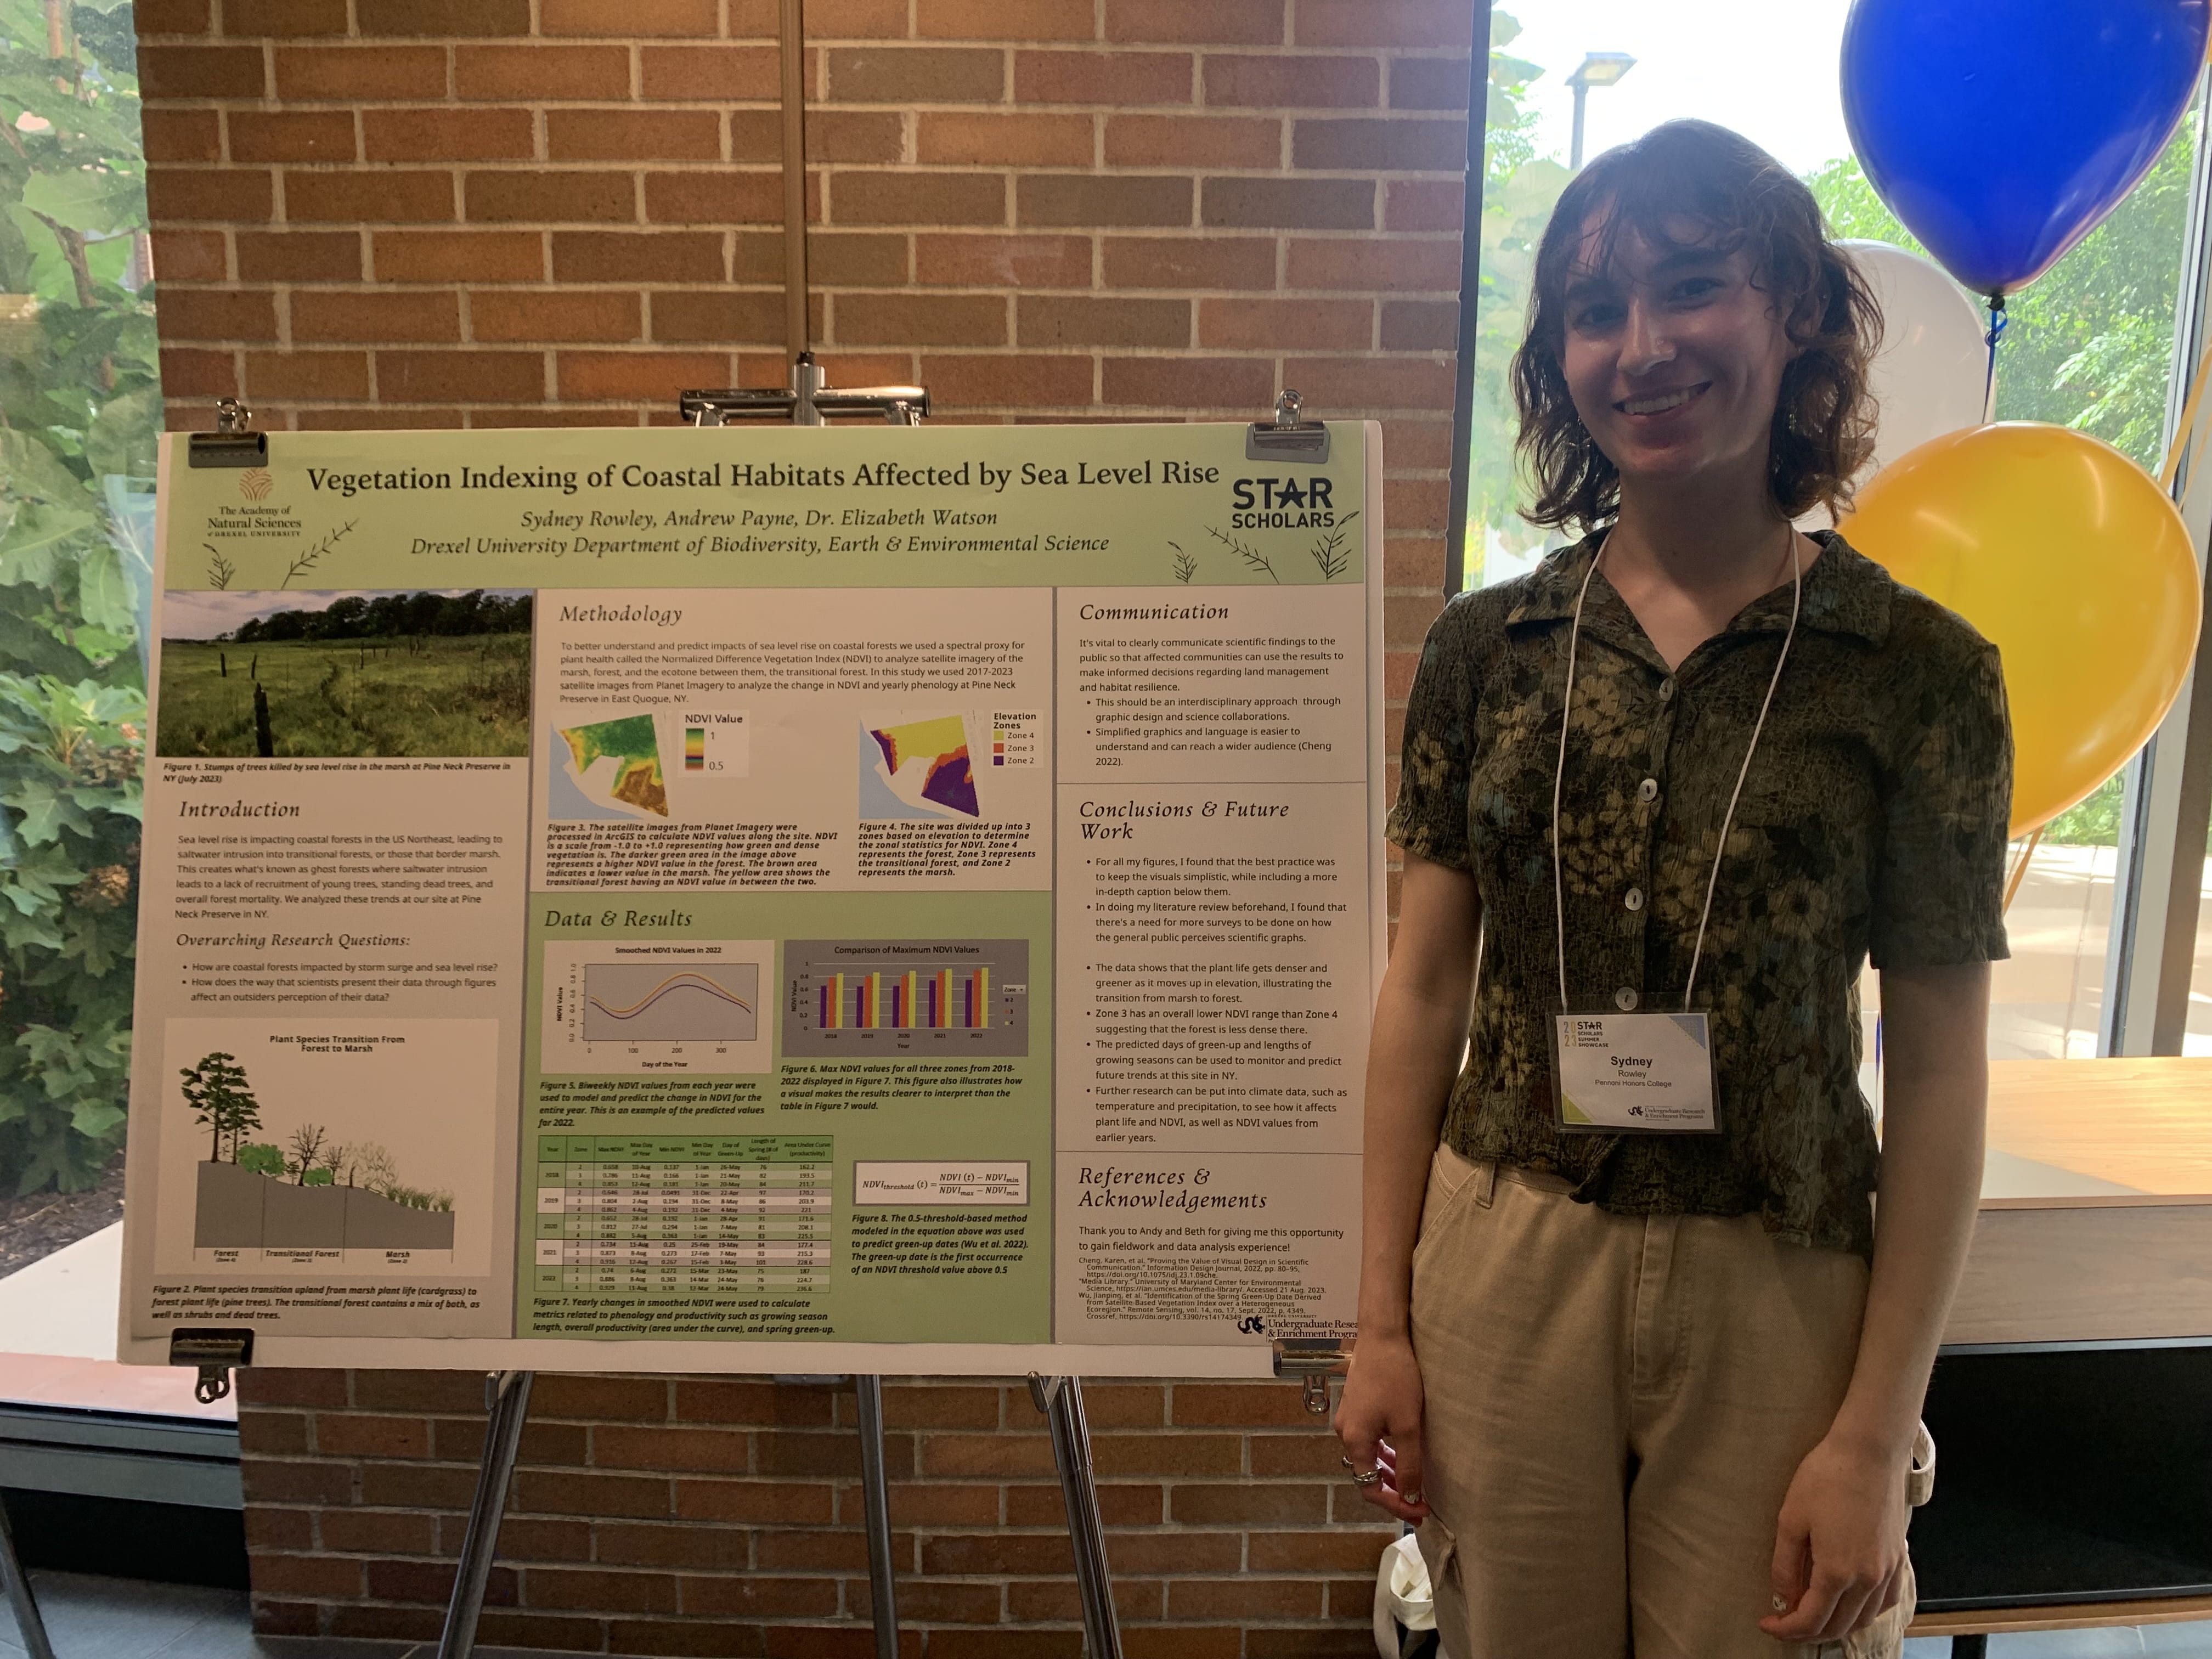 Sydney Rowley and research poster